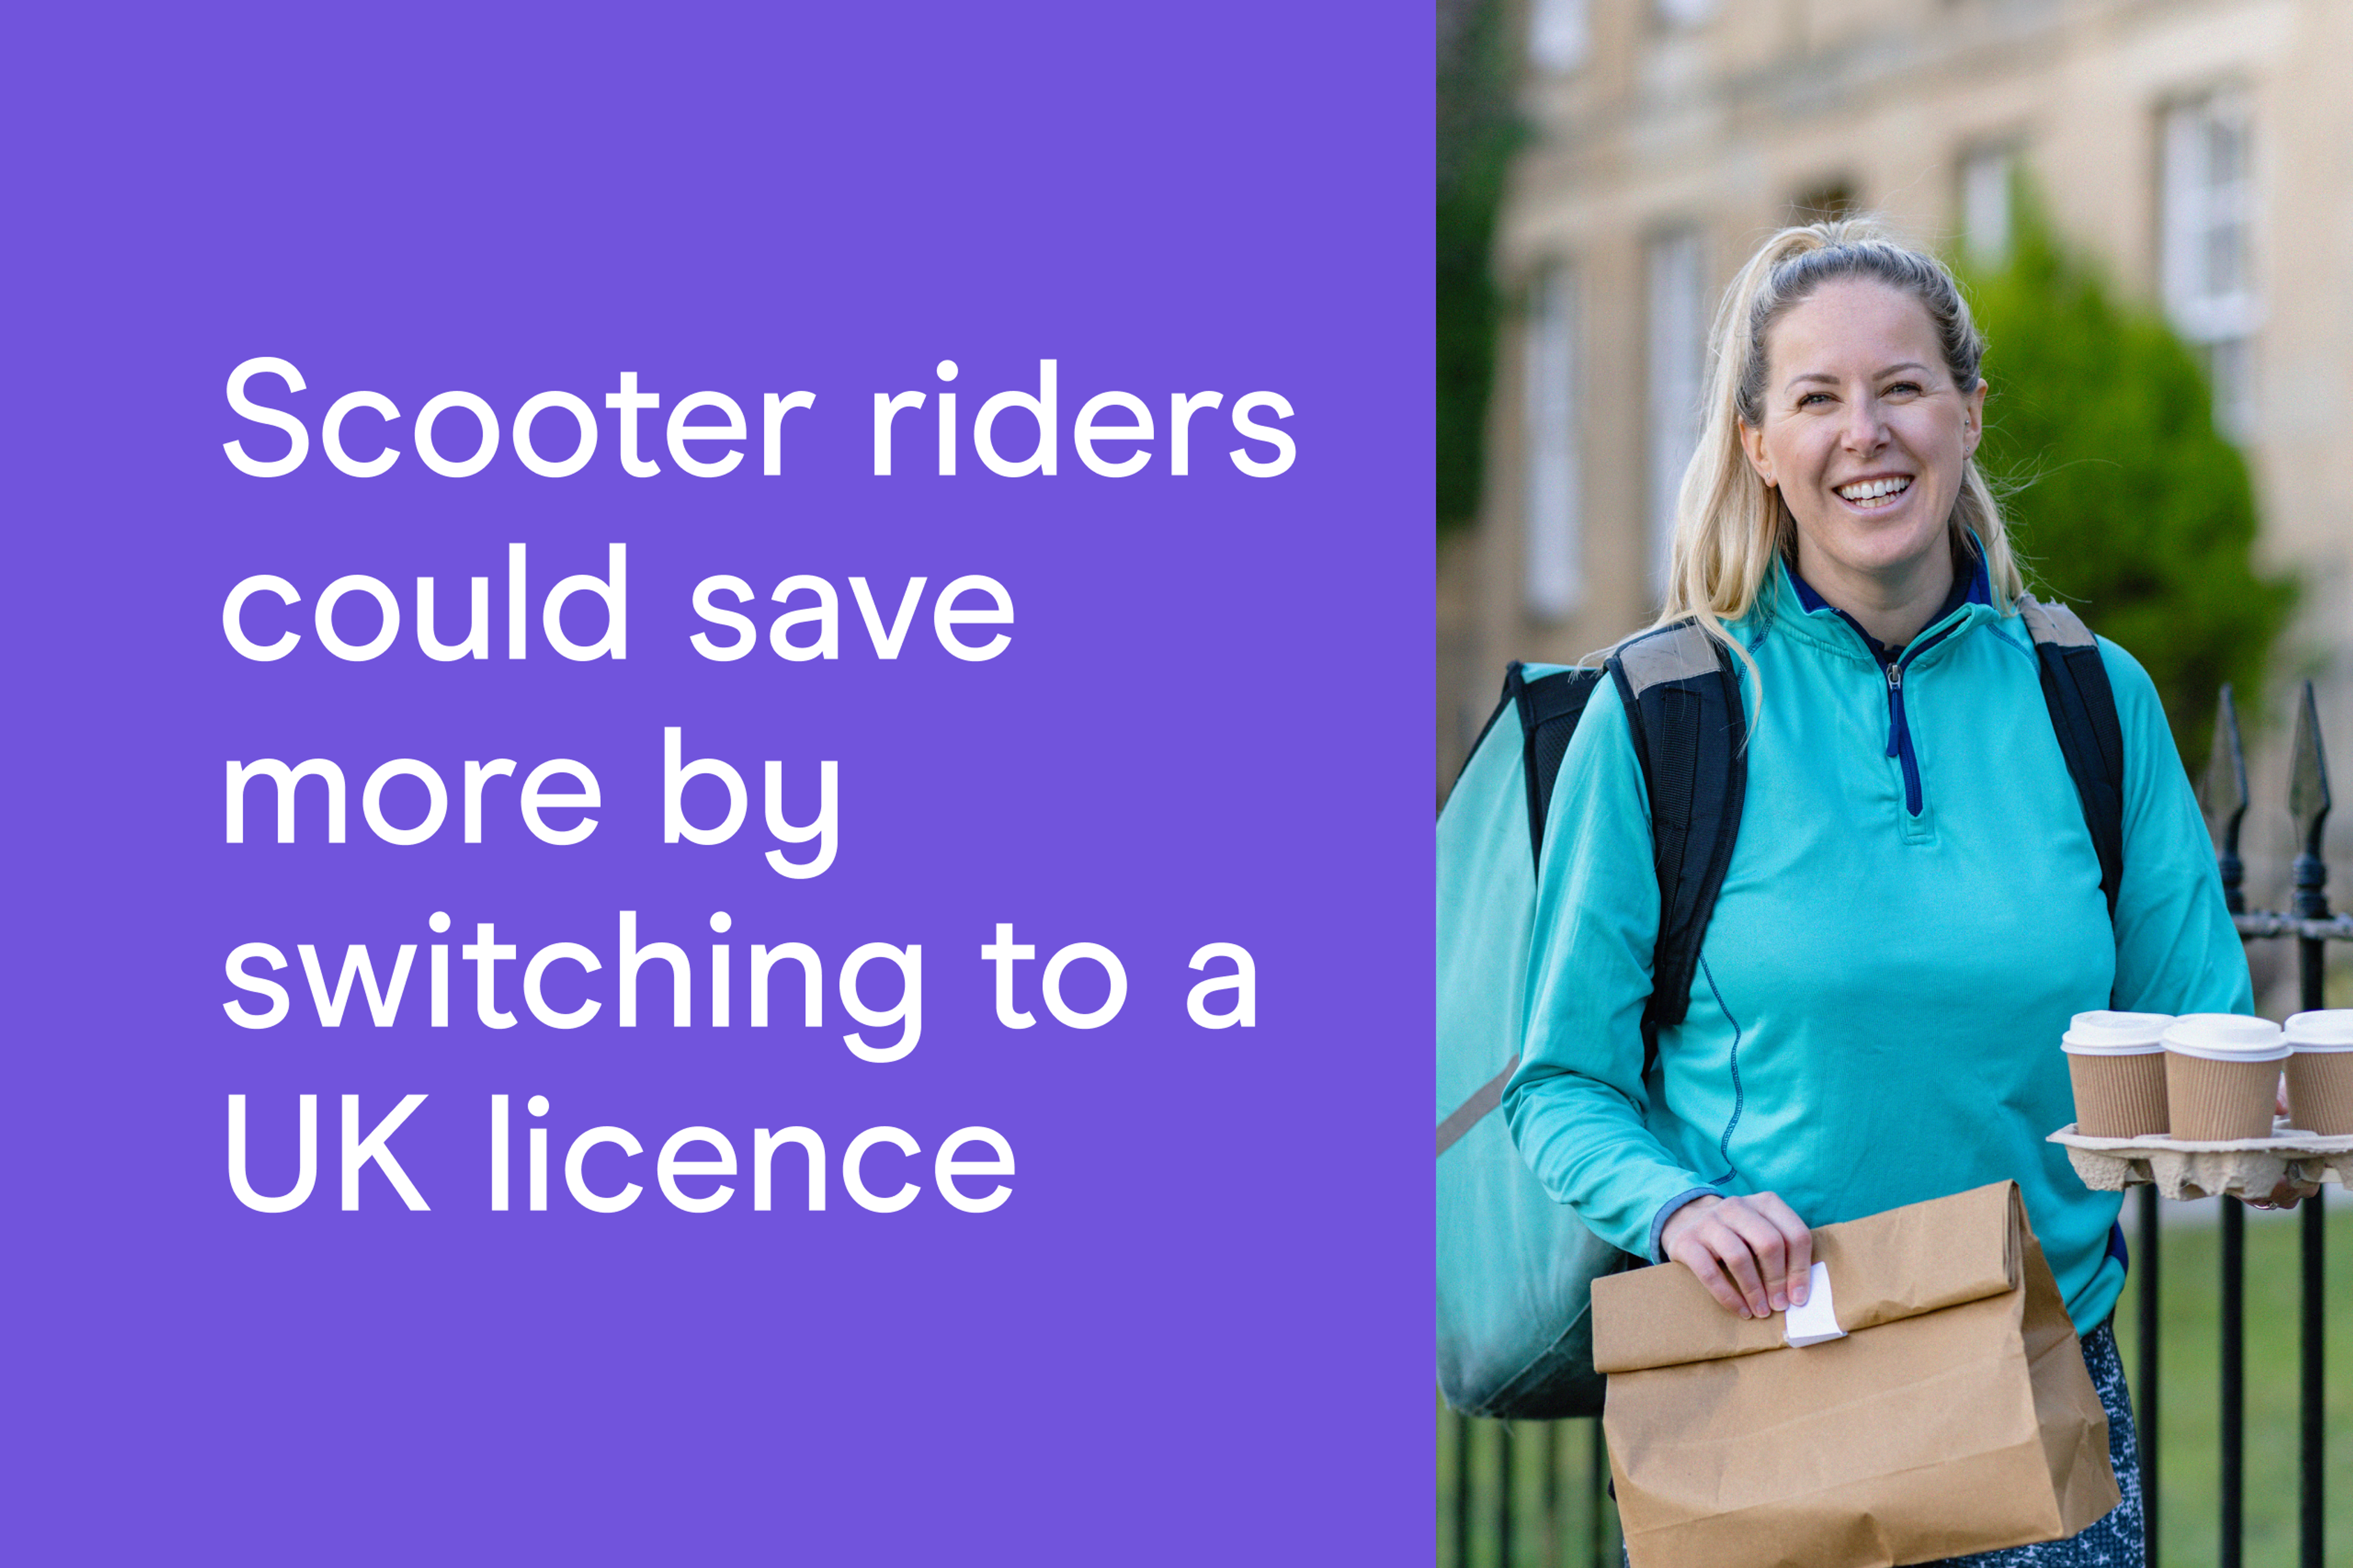 Scooter riders could save more by switching to a UK licence